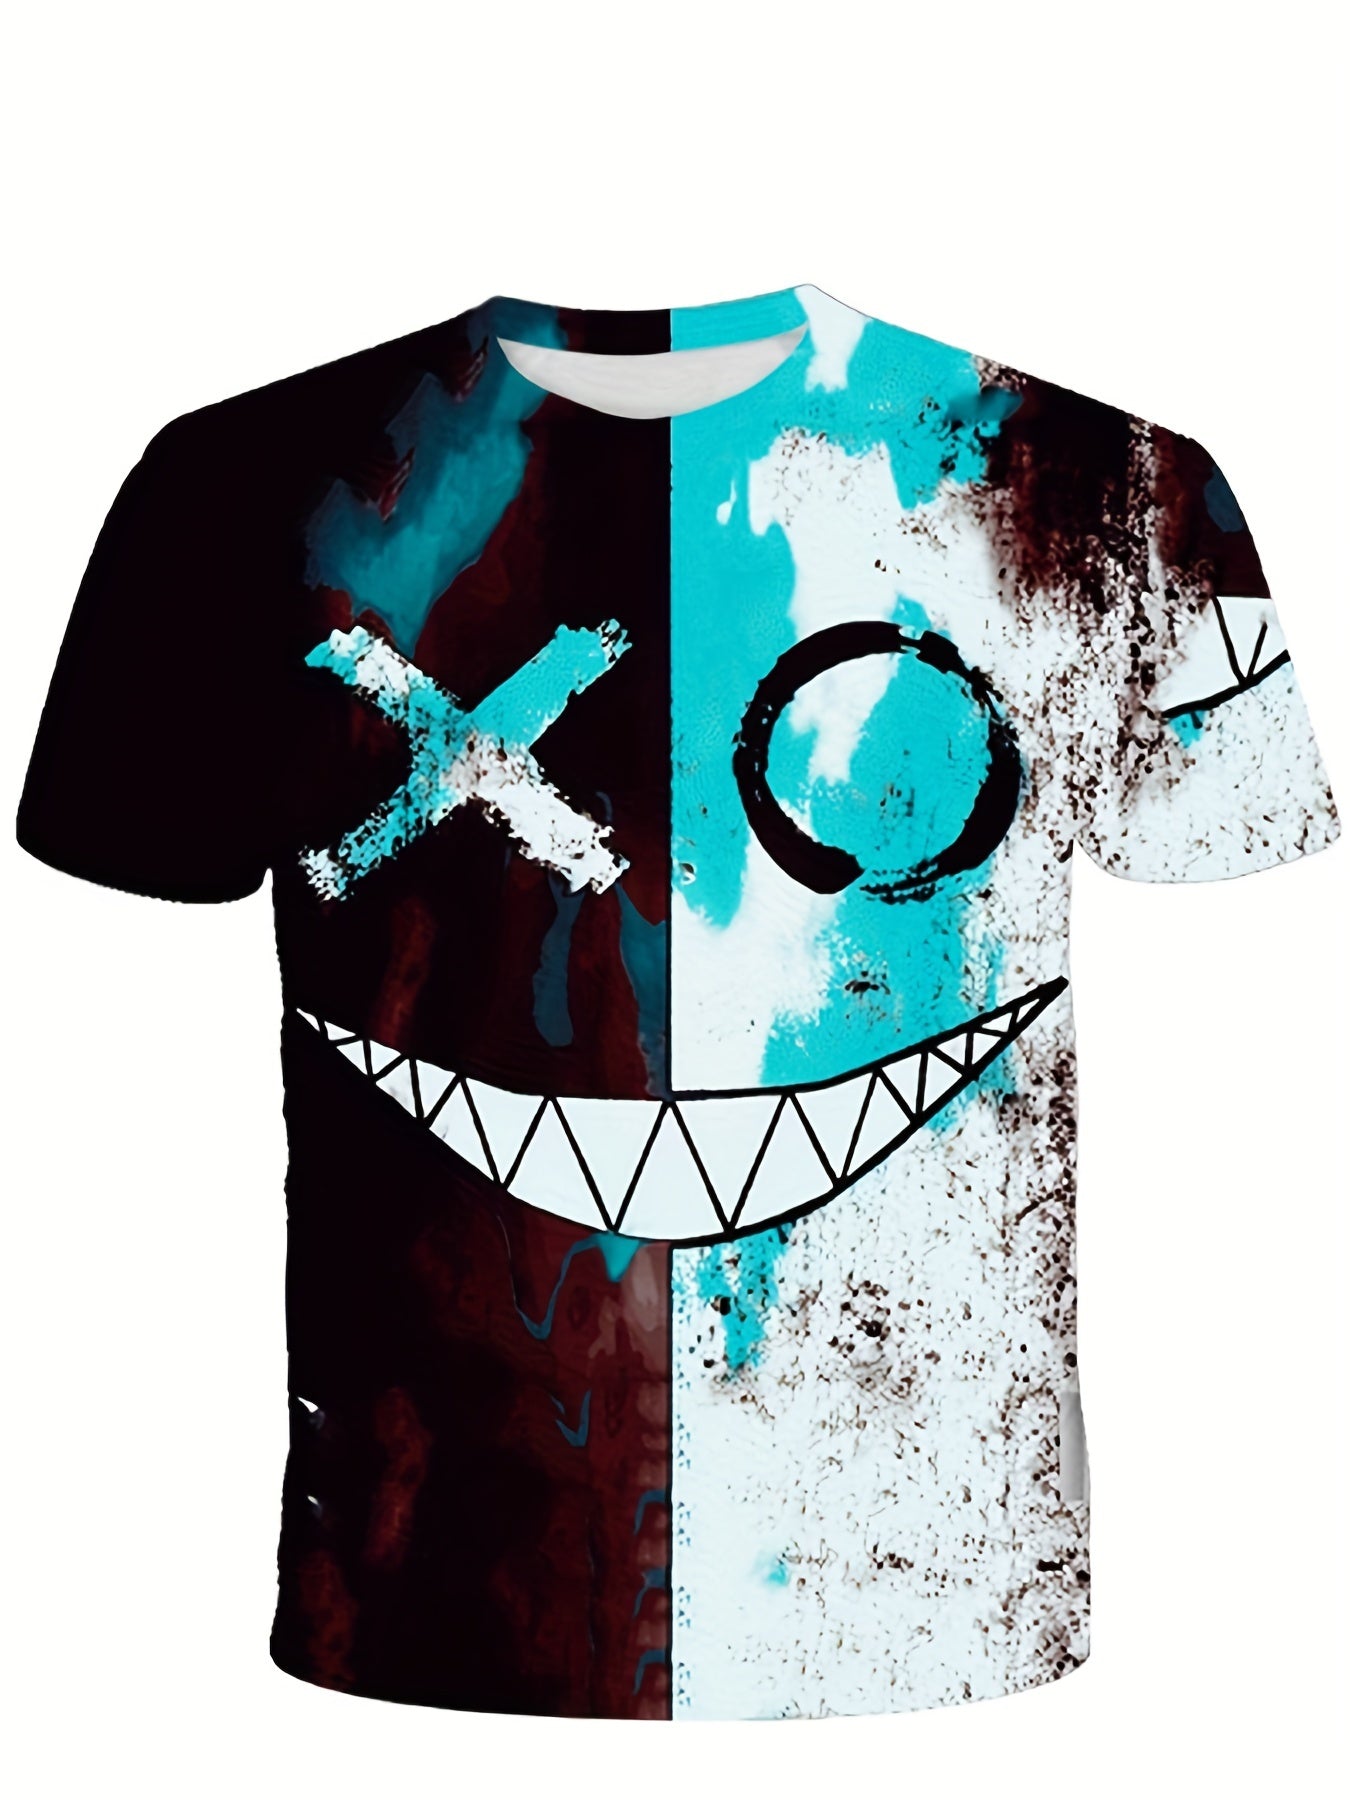 Colorful Graffiti Face T-Shirt For Boys - 3D Digital Print, Active & Stretchy Short Sleeve Tee For Summer Outdoor Fun